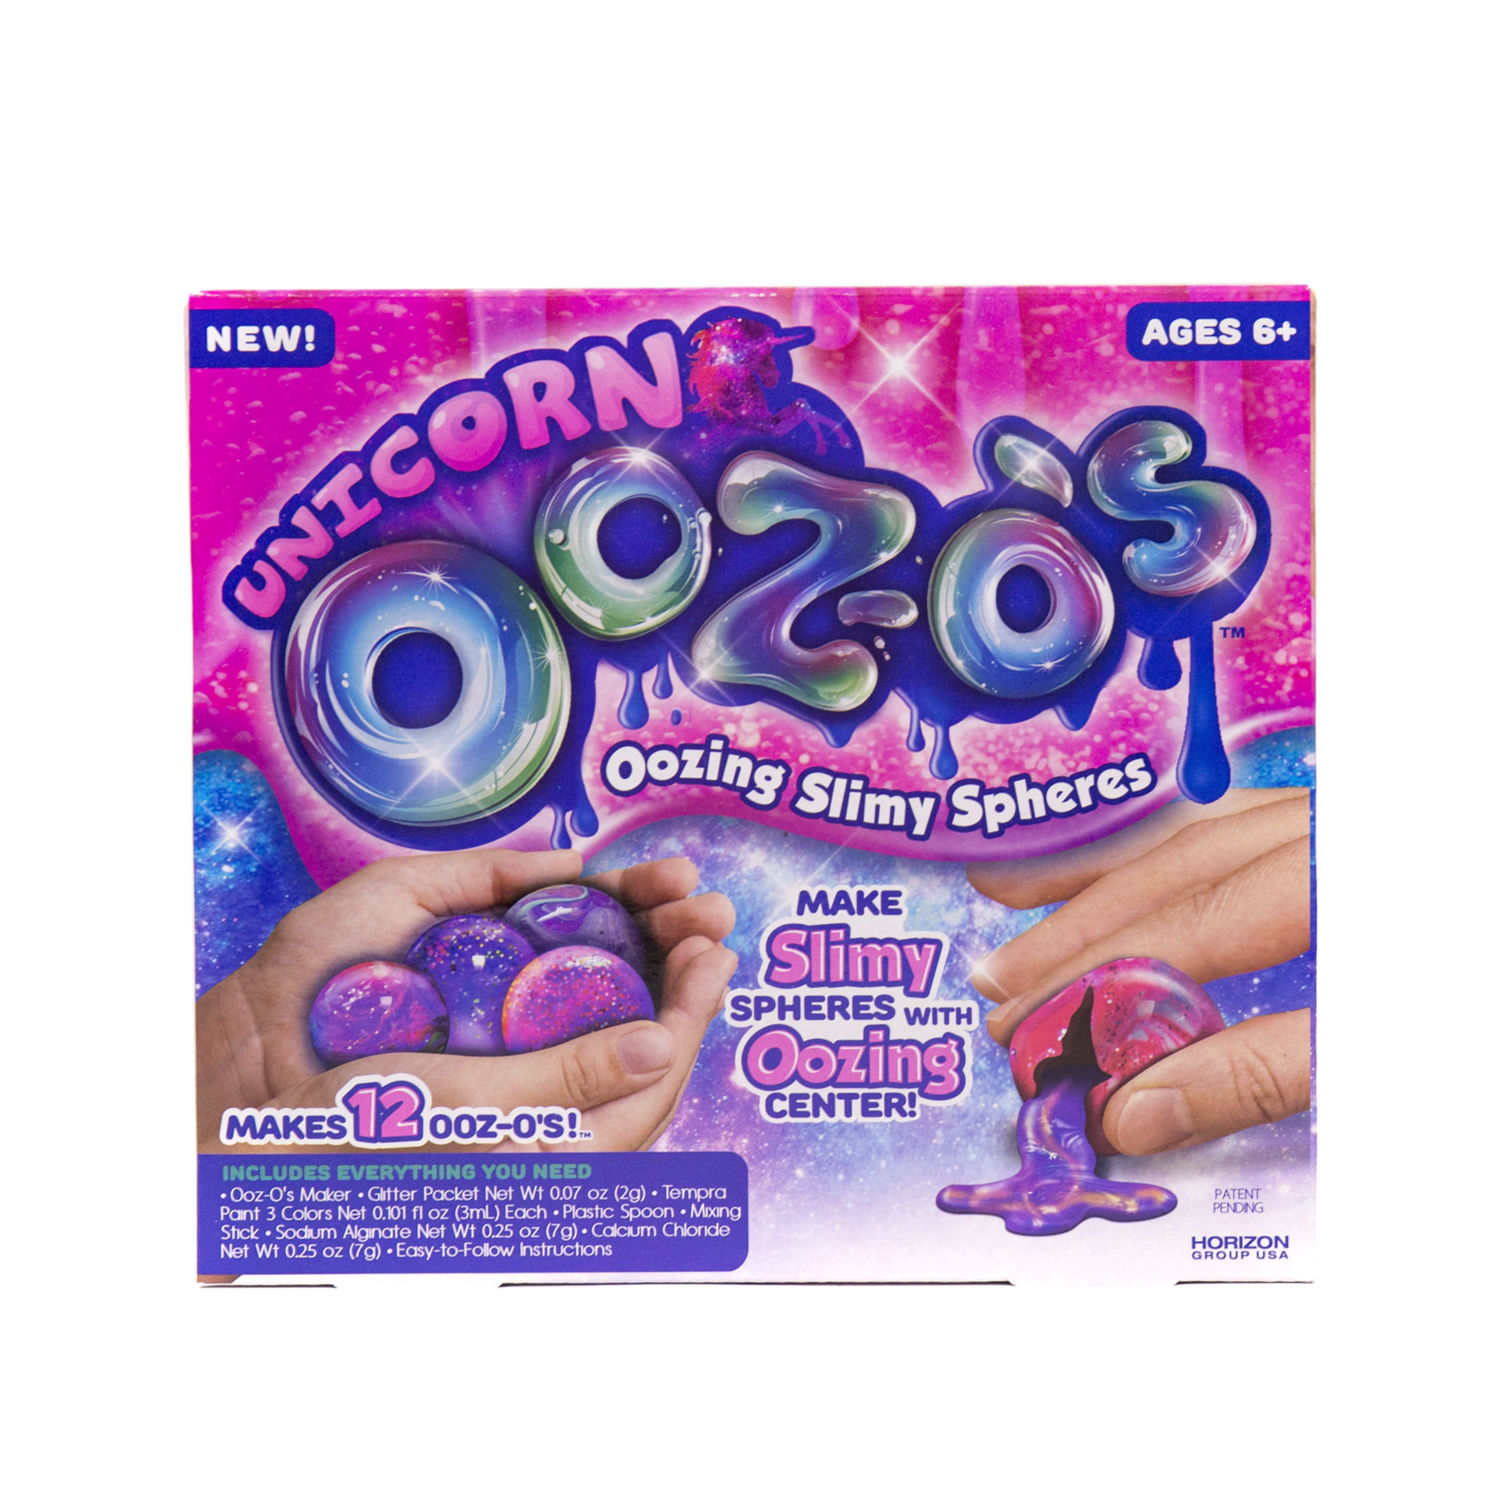 OOZ-OS Galaxy Slimy Oozing Spheres by Horizon Group USA 